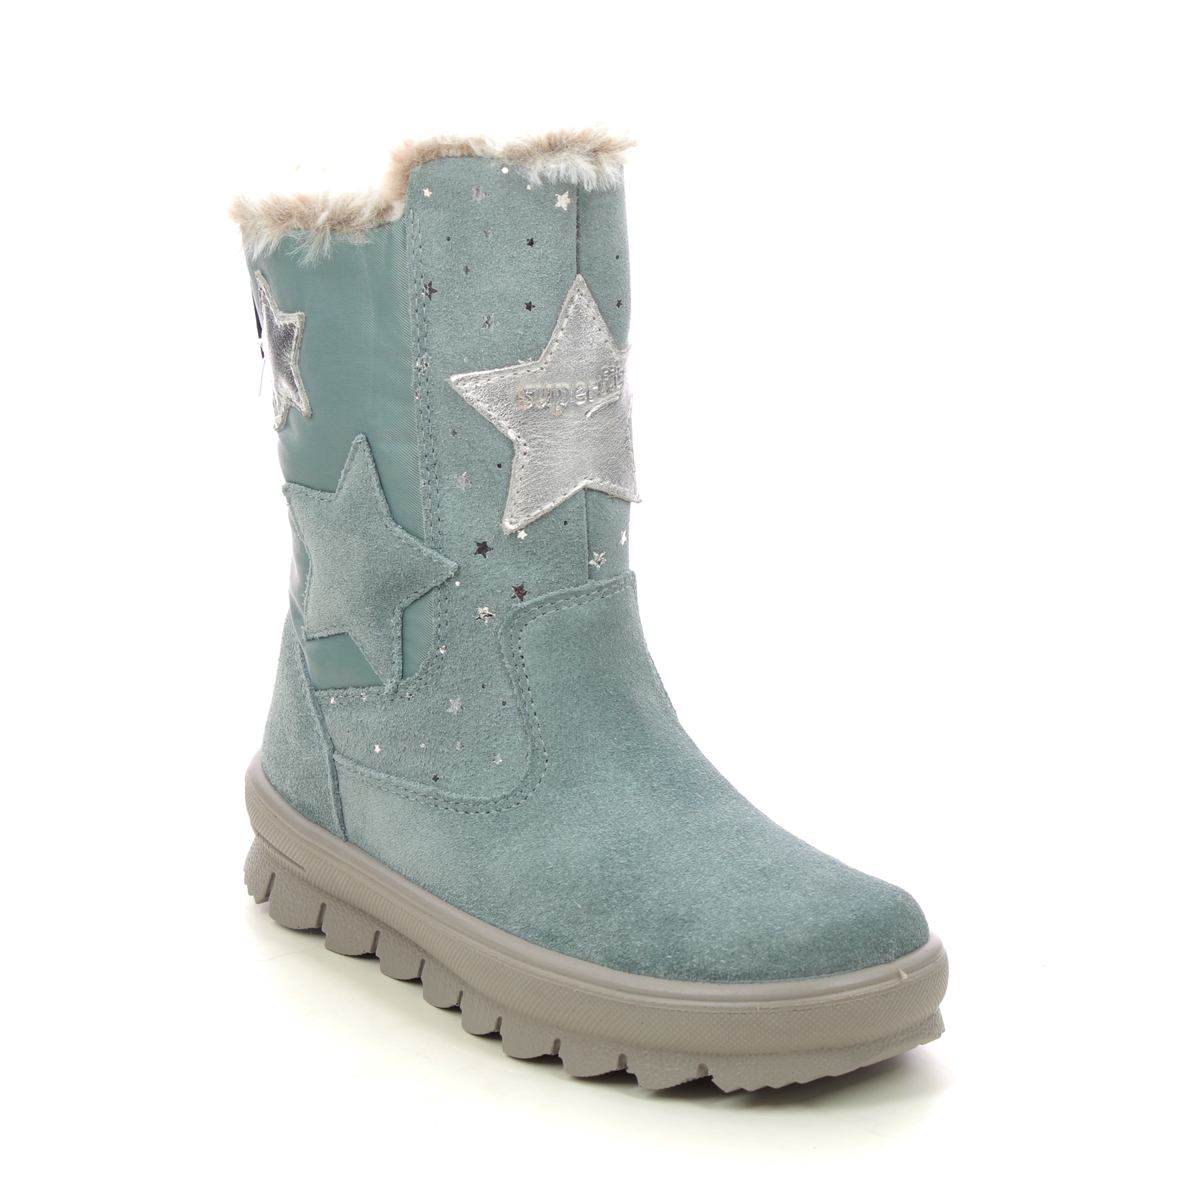 Superfit Flavia Star Gtx Blue Suede Kids Girls boots 1000219-7500 in a Plain Leather in Size 30